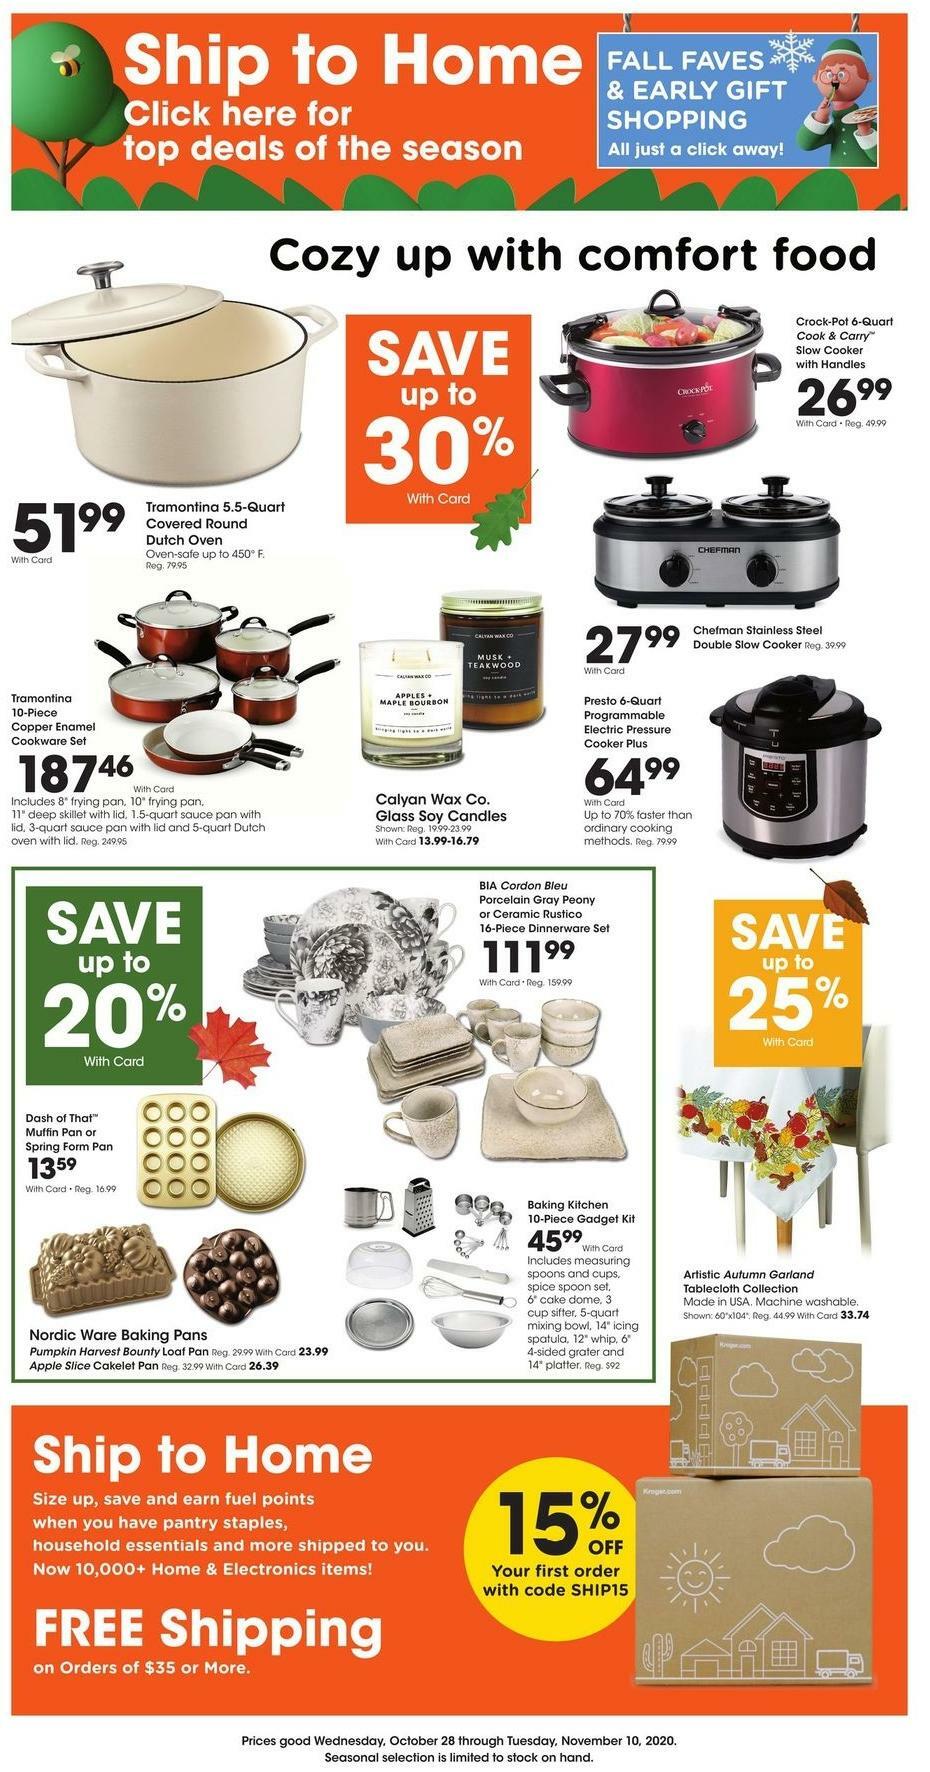 Kroger Ship to Home Weekly Ad from October 28